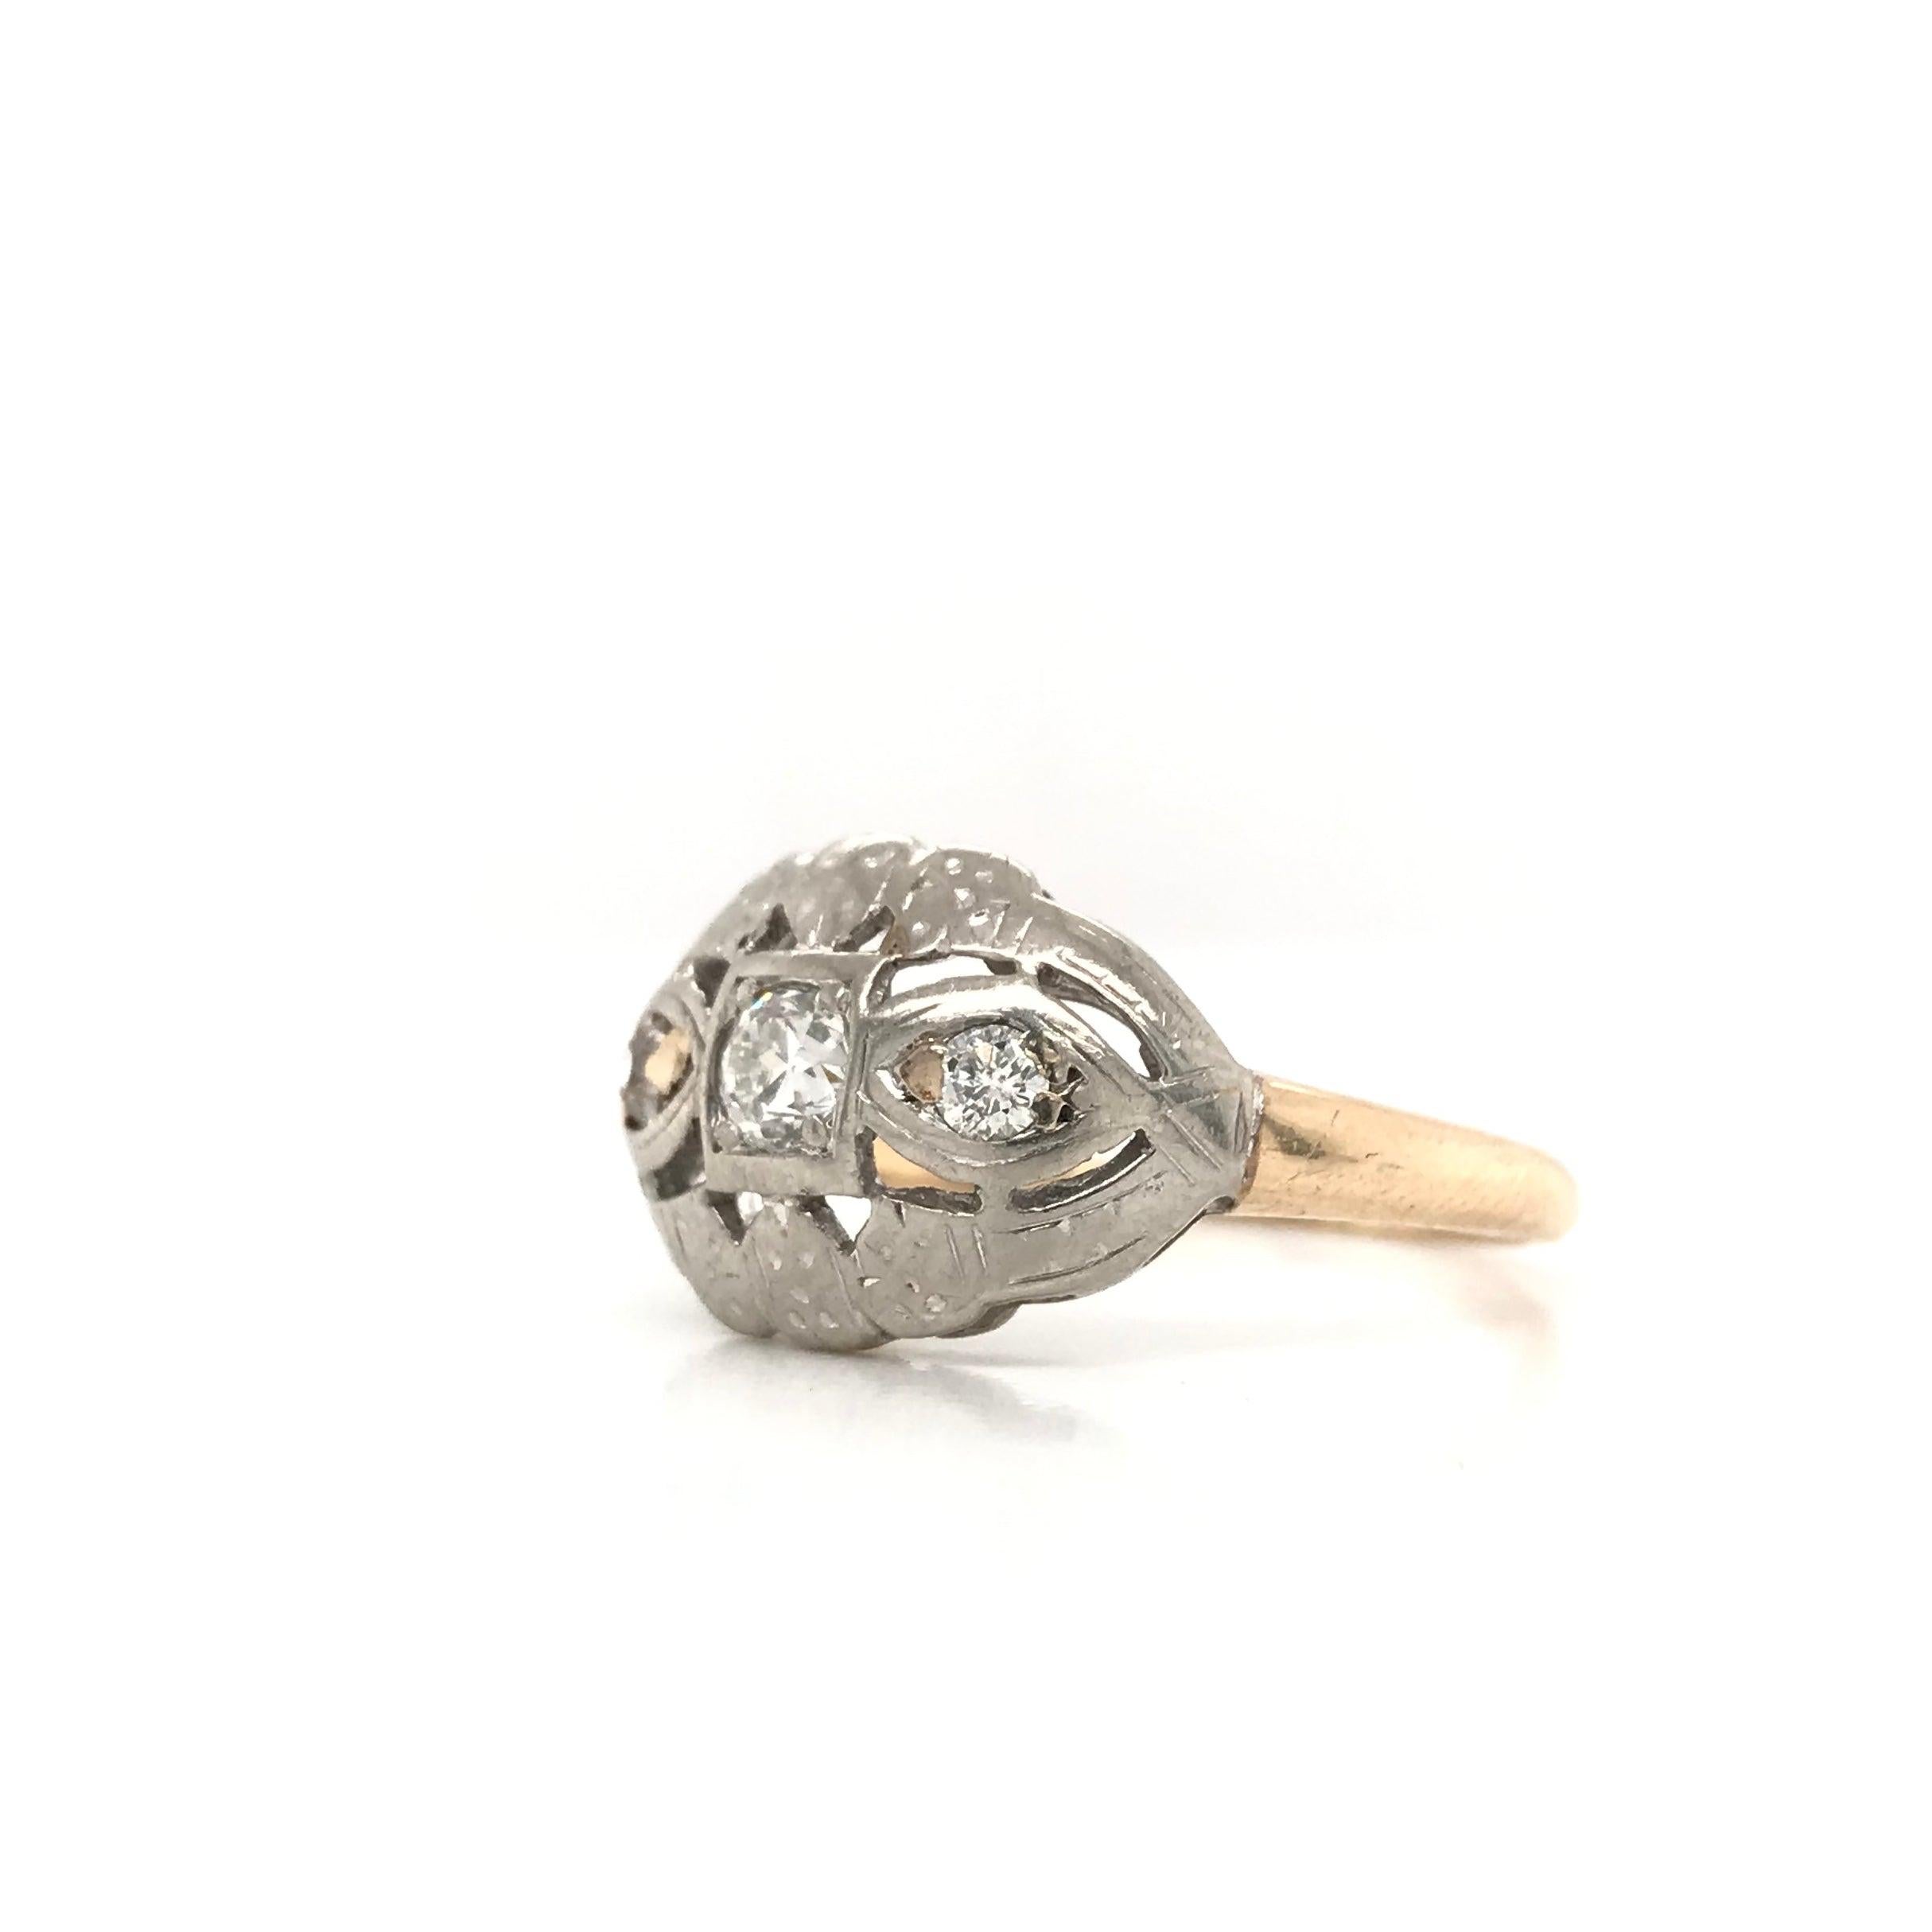 This piece was crafted sometime during the Mid Century design period ( 1940-1960 ). The setting features a 14k yellow gold shank with a distinctive 14k white gold head. The setting features basic filigree, subtle engravings and three diamond